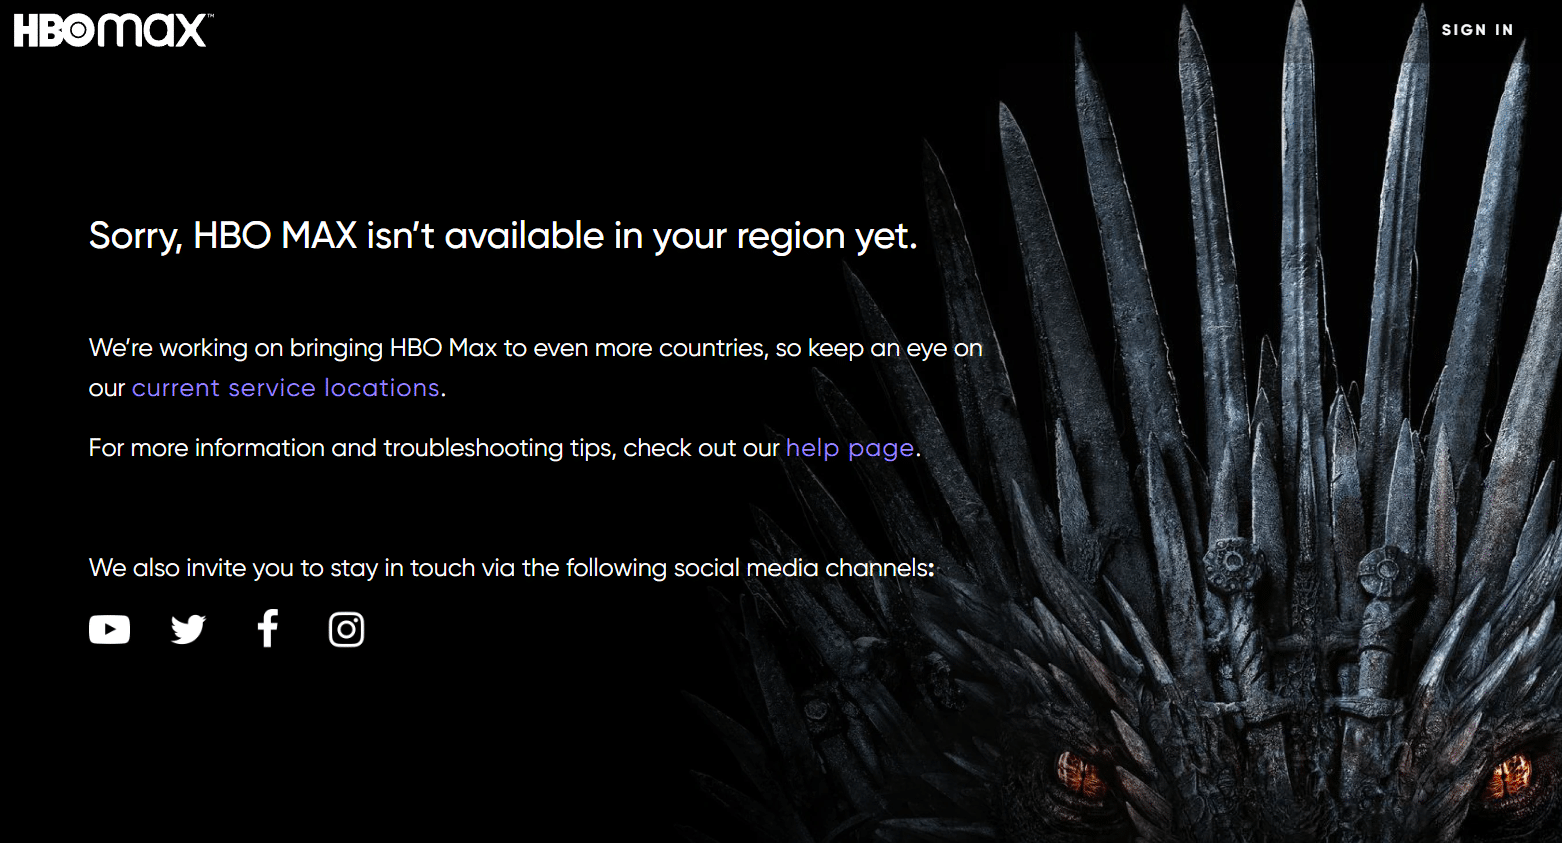 HBO Max not available